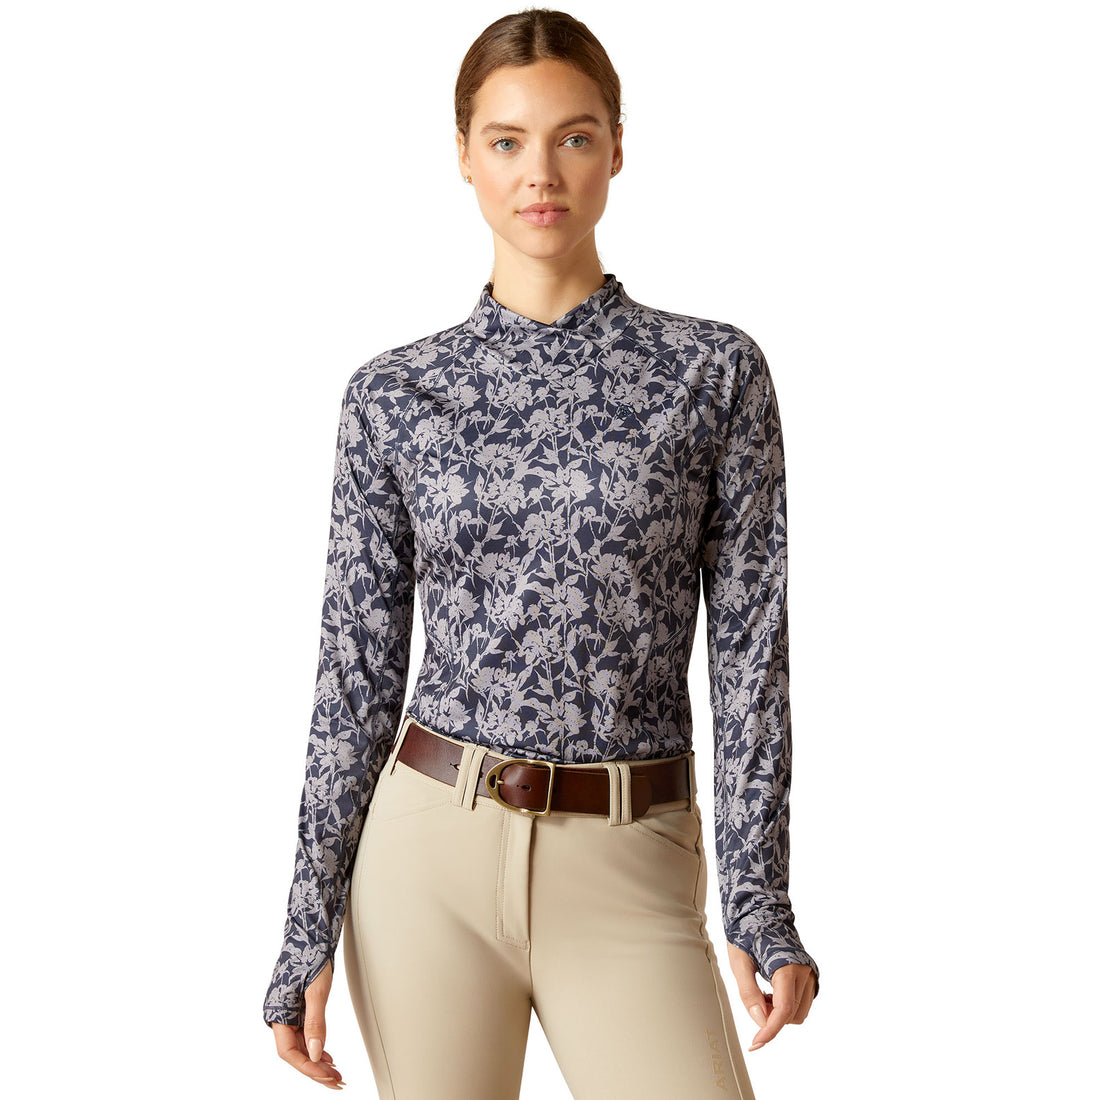 Ariat Lowell Wrap Baselayer